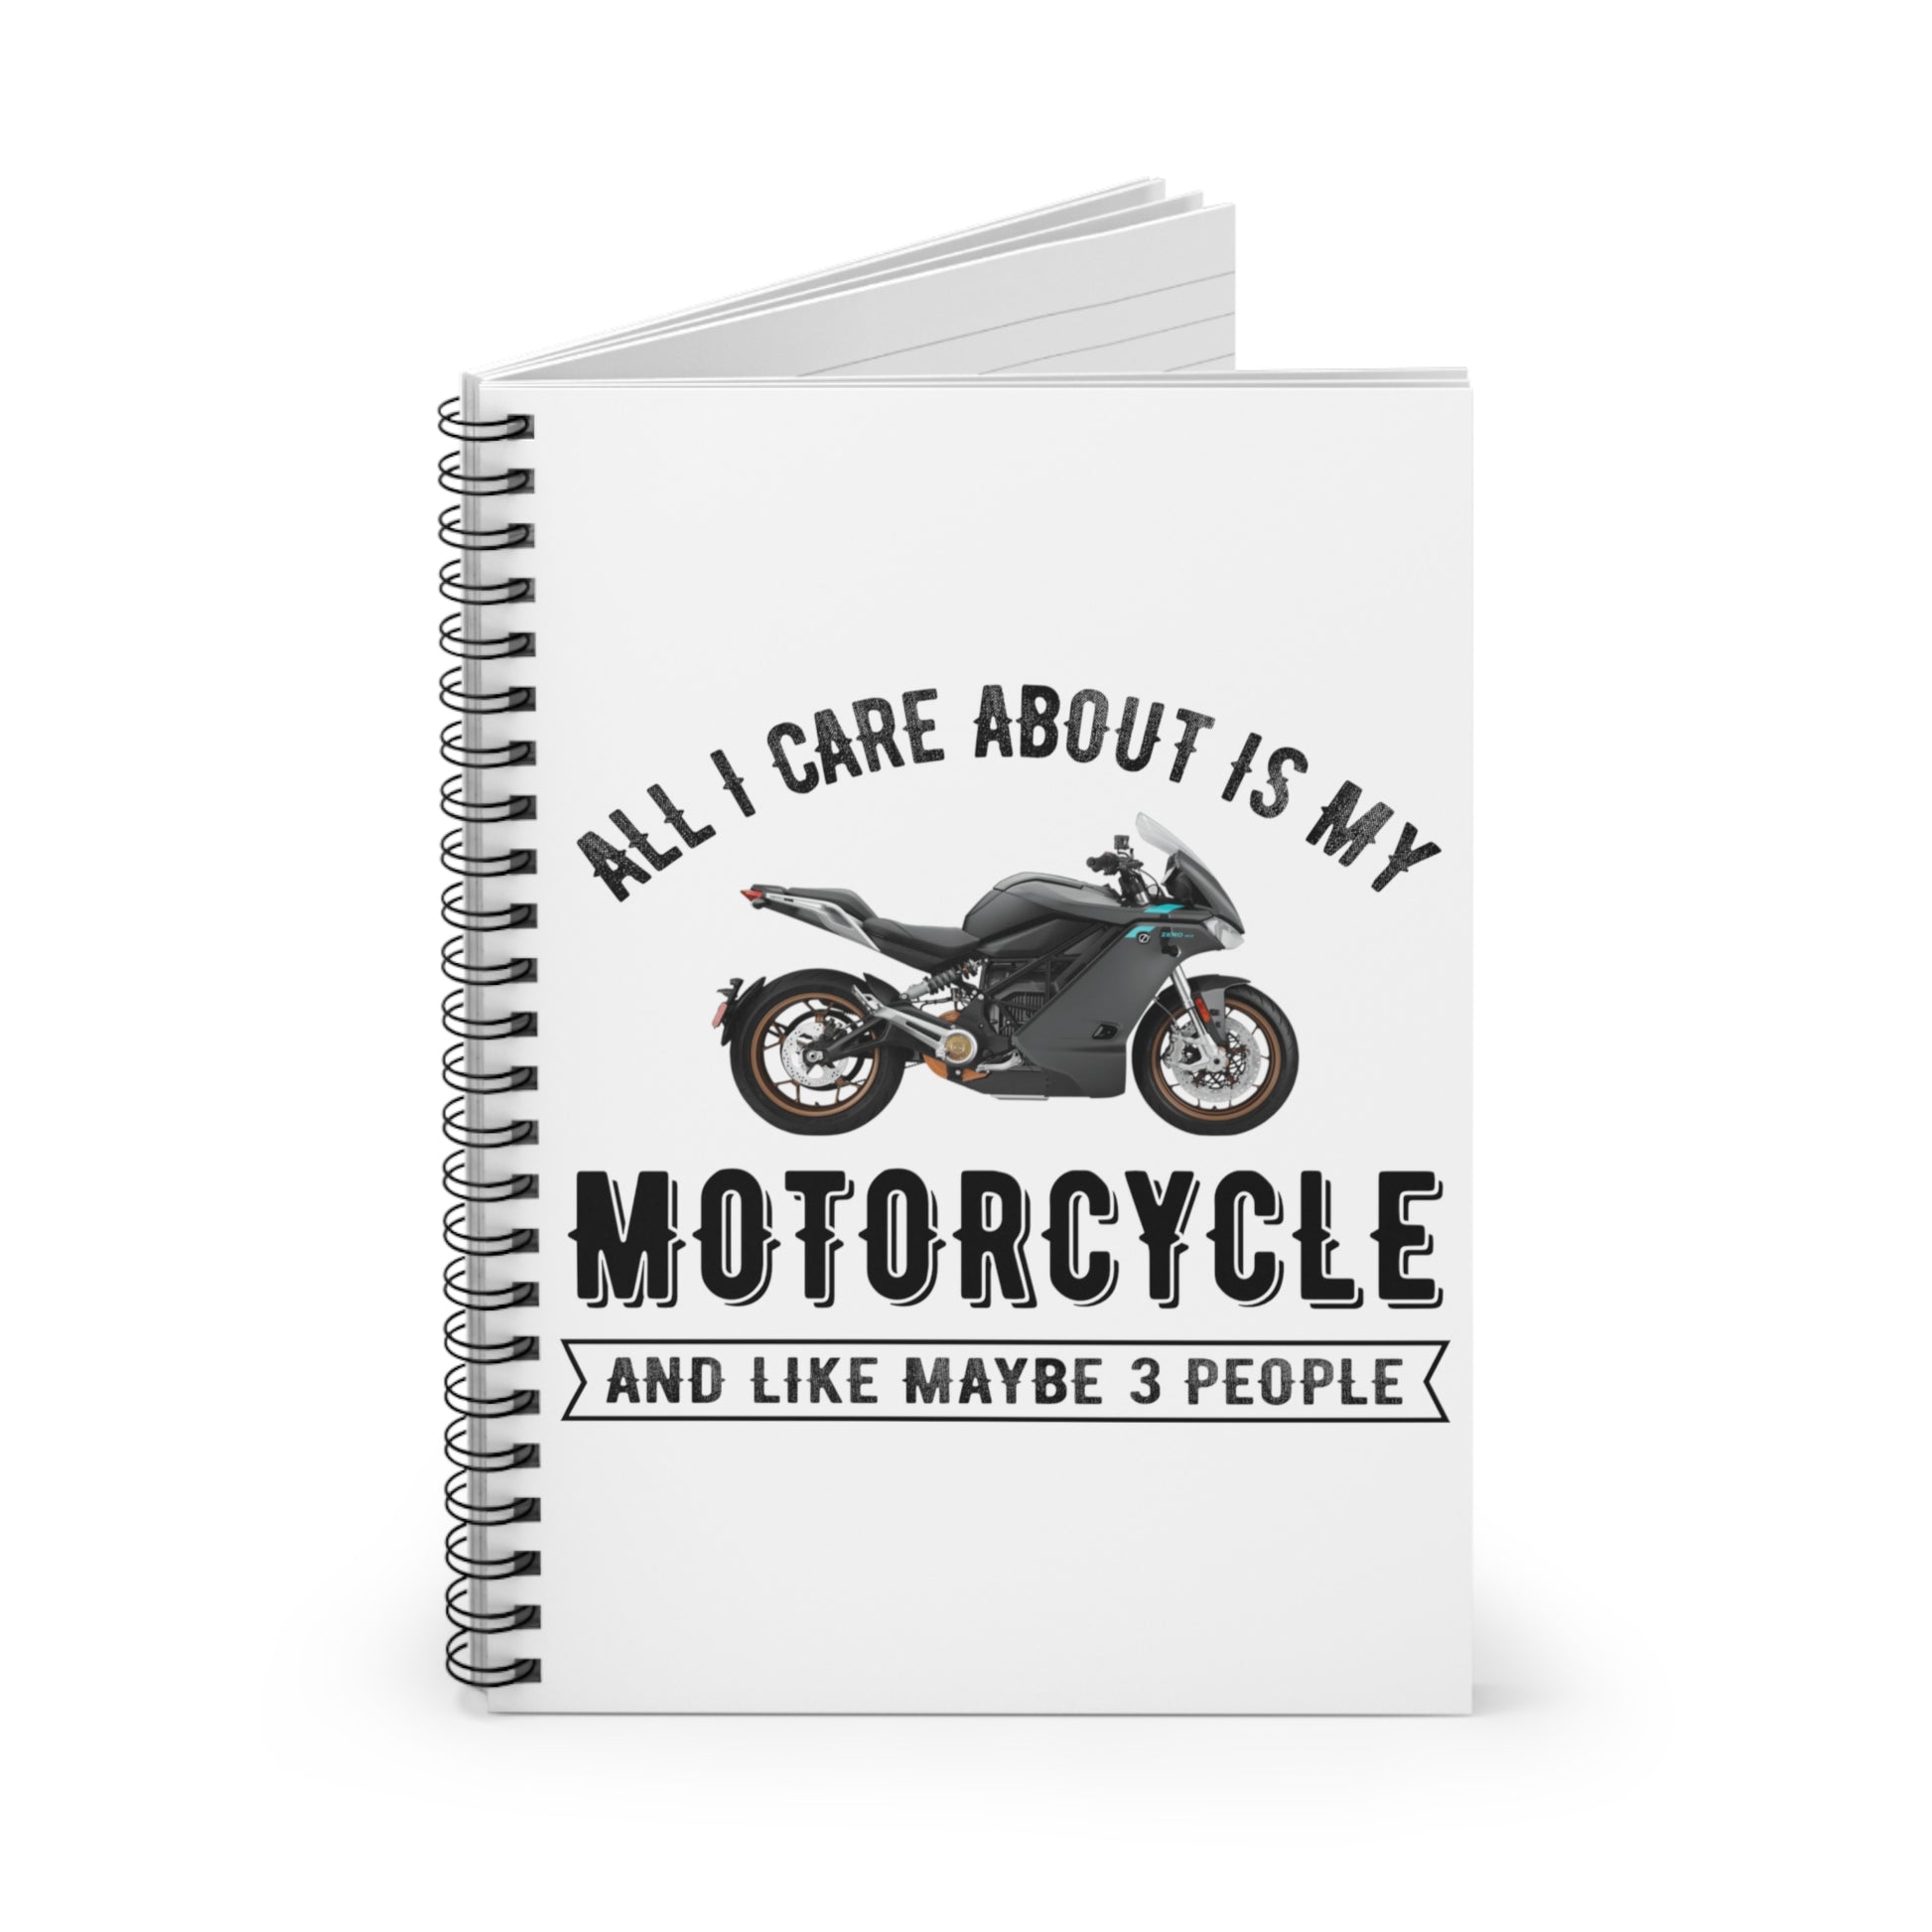 Motorcycle Zen: Spiral Notebook - Log Books - Journals - Diaries - and More Custom Printed by TheGlassyLass